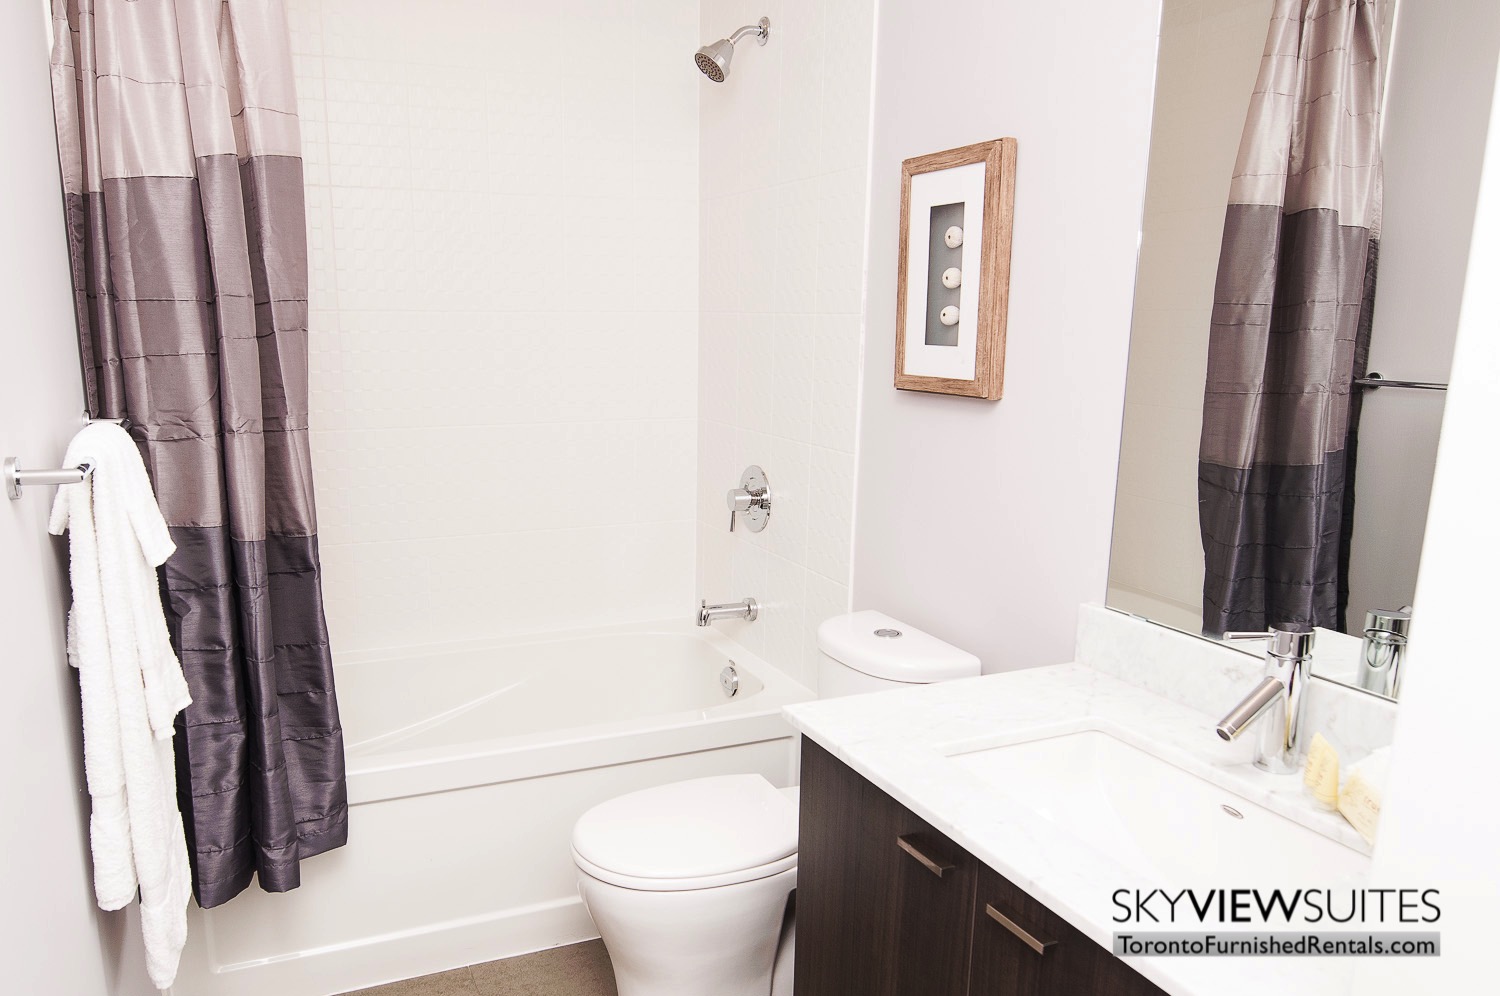 King west corporate rentals toronto shower and sink